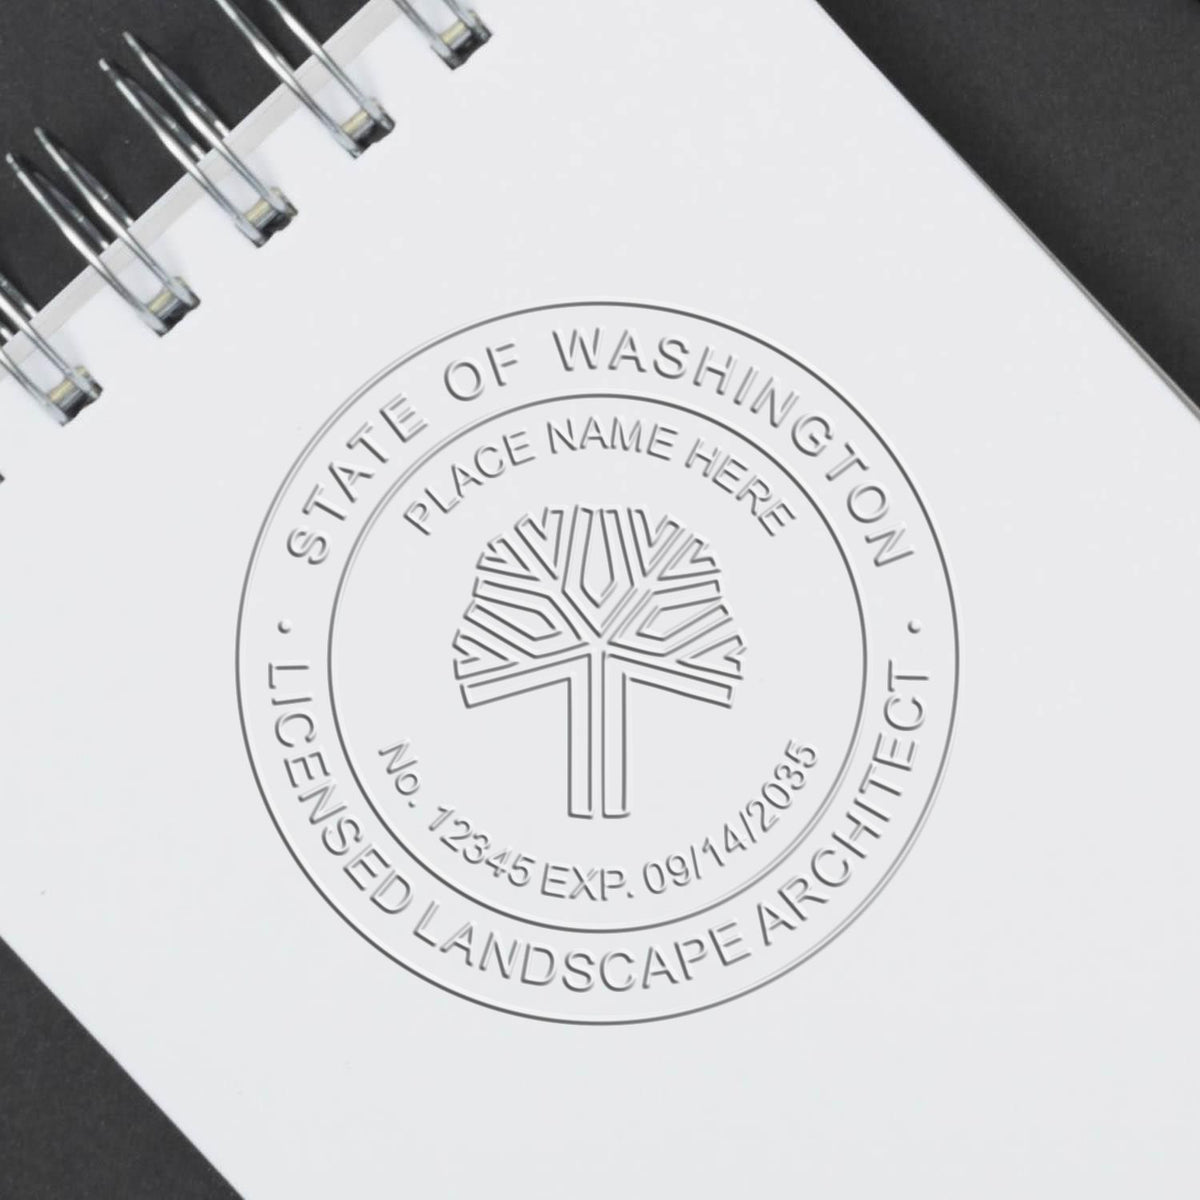 The Soft Pocket Washington Landscape Architect Embosser stamp impression comes to life with a crisp, detailed photo on paper - showcasing true professional quality.